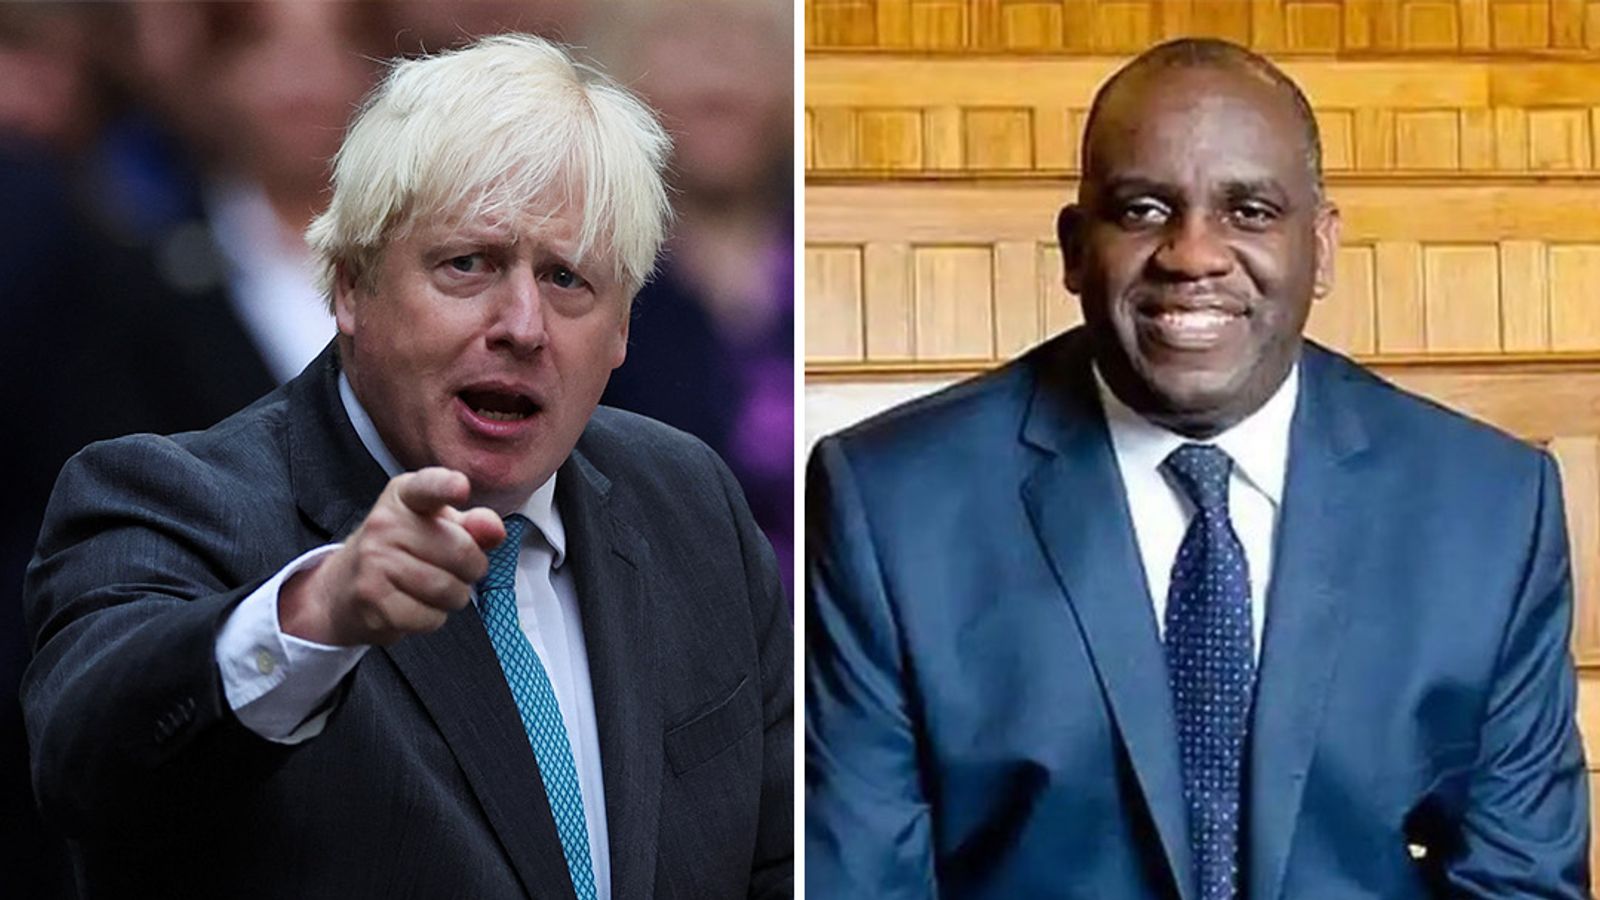 Boris Johnson had 'problem' responding to race report due to his 'bad track record', peer claims